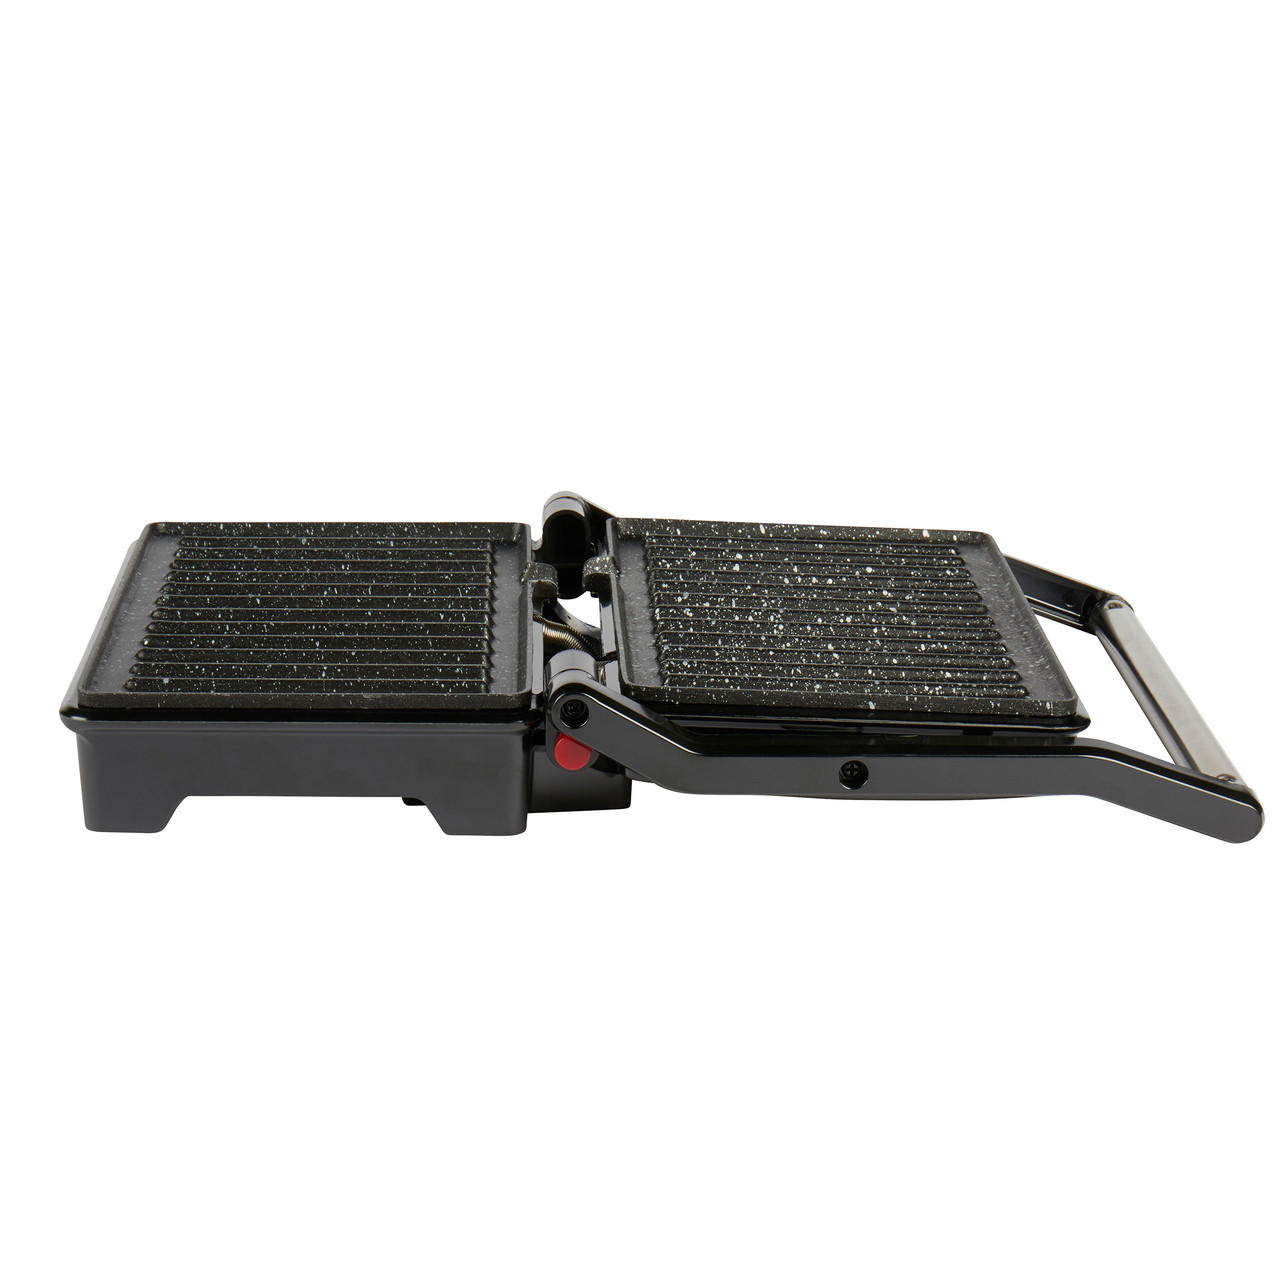 https://cdn11.bigcommerce.com/s-5vfc75n1yv/images/stencil/1280x1280/products/152/70086/megastone-non-stick-2-in-1-fold-out-health-grill-and-panini-maker-750-w-salter-ek2384mg-5054061328370__93111.1703737759.jpg?c=1